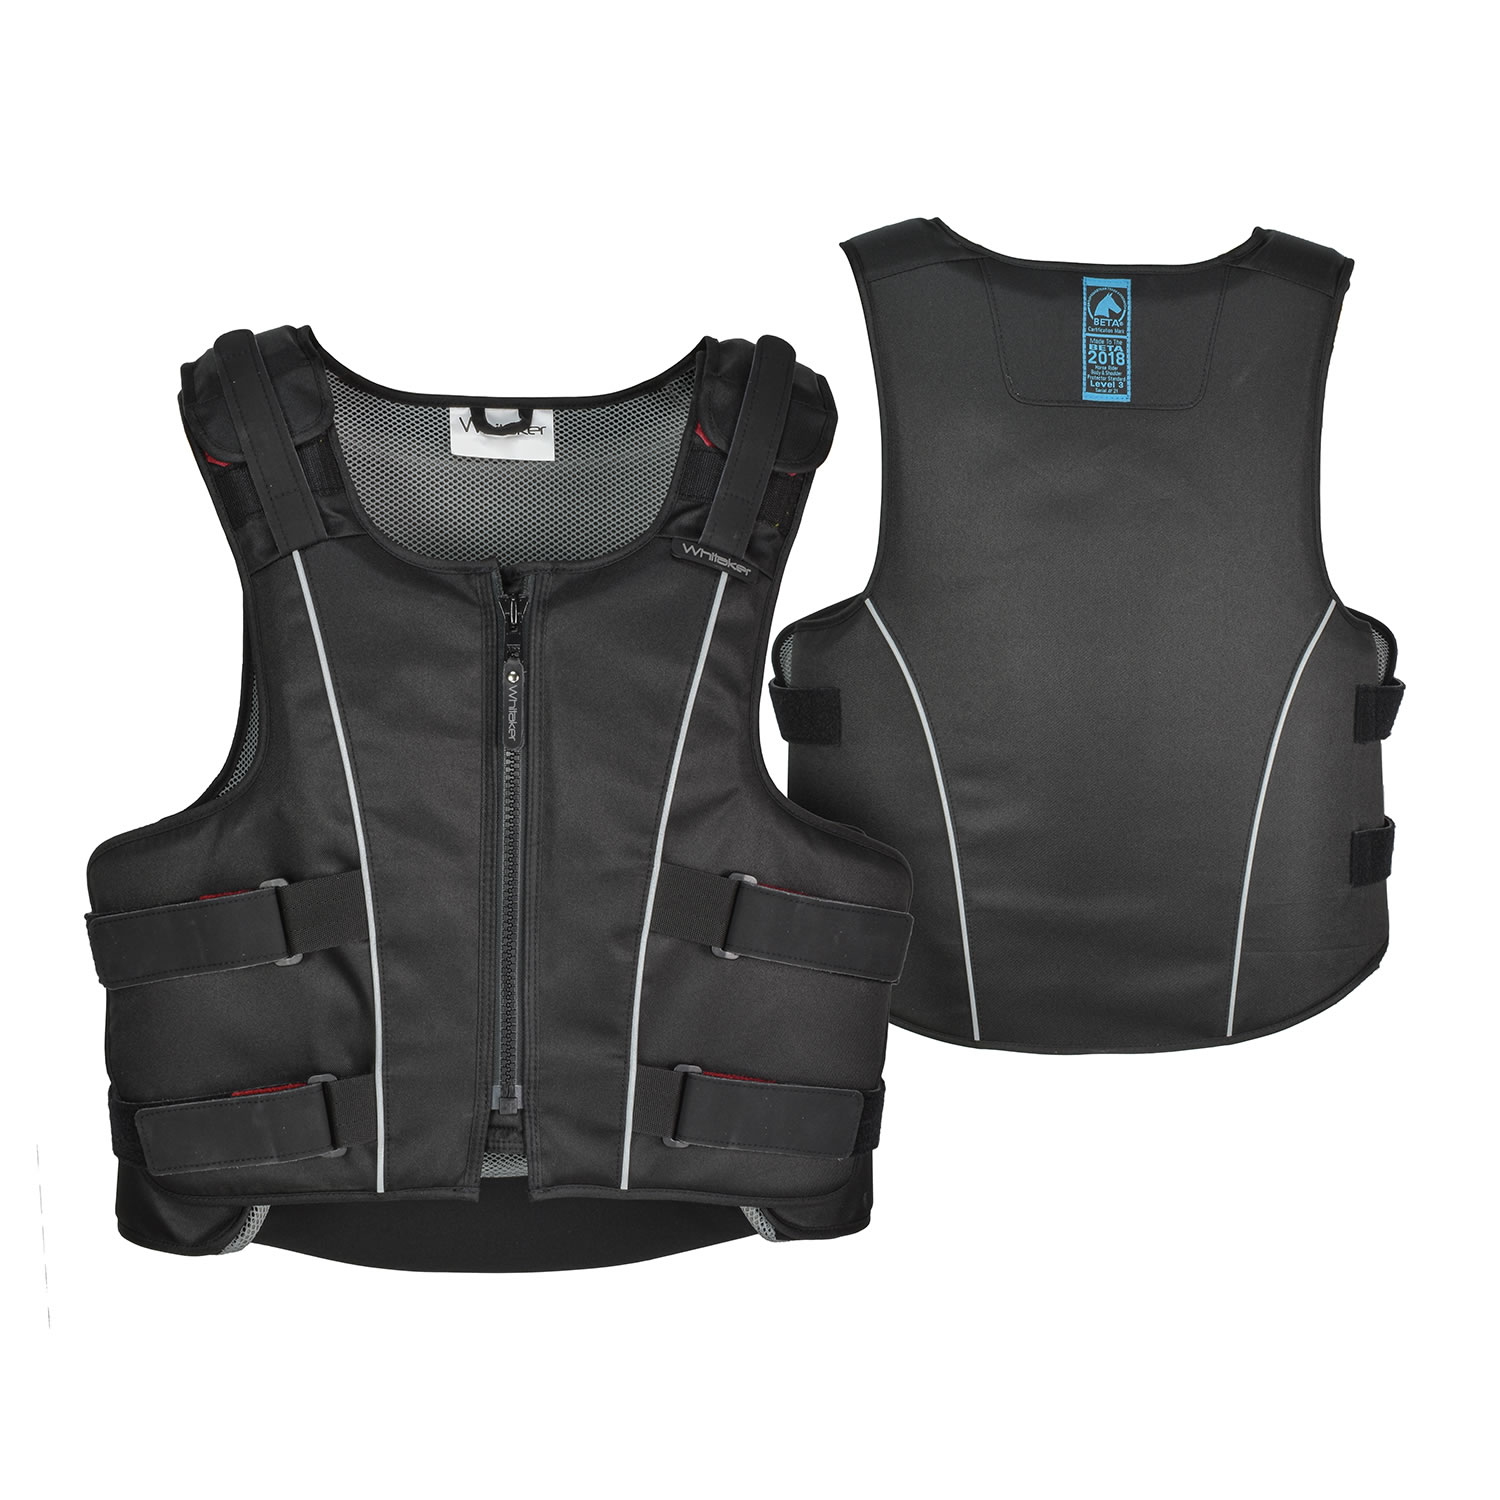 WHITAKER PRO BODY PROTECTOR BLACK  LARGE